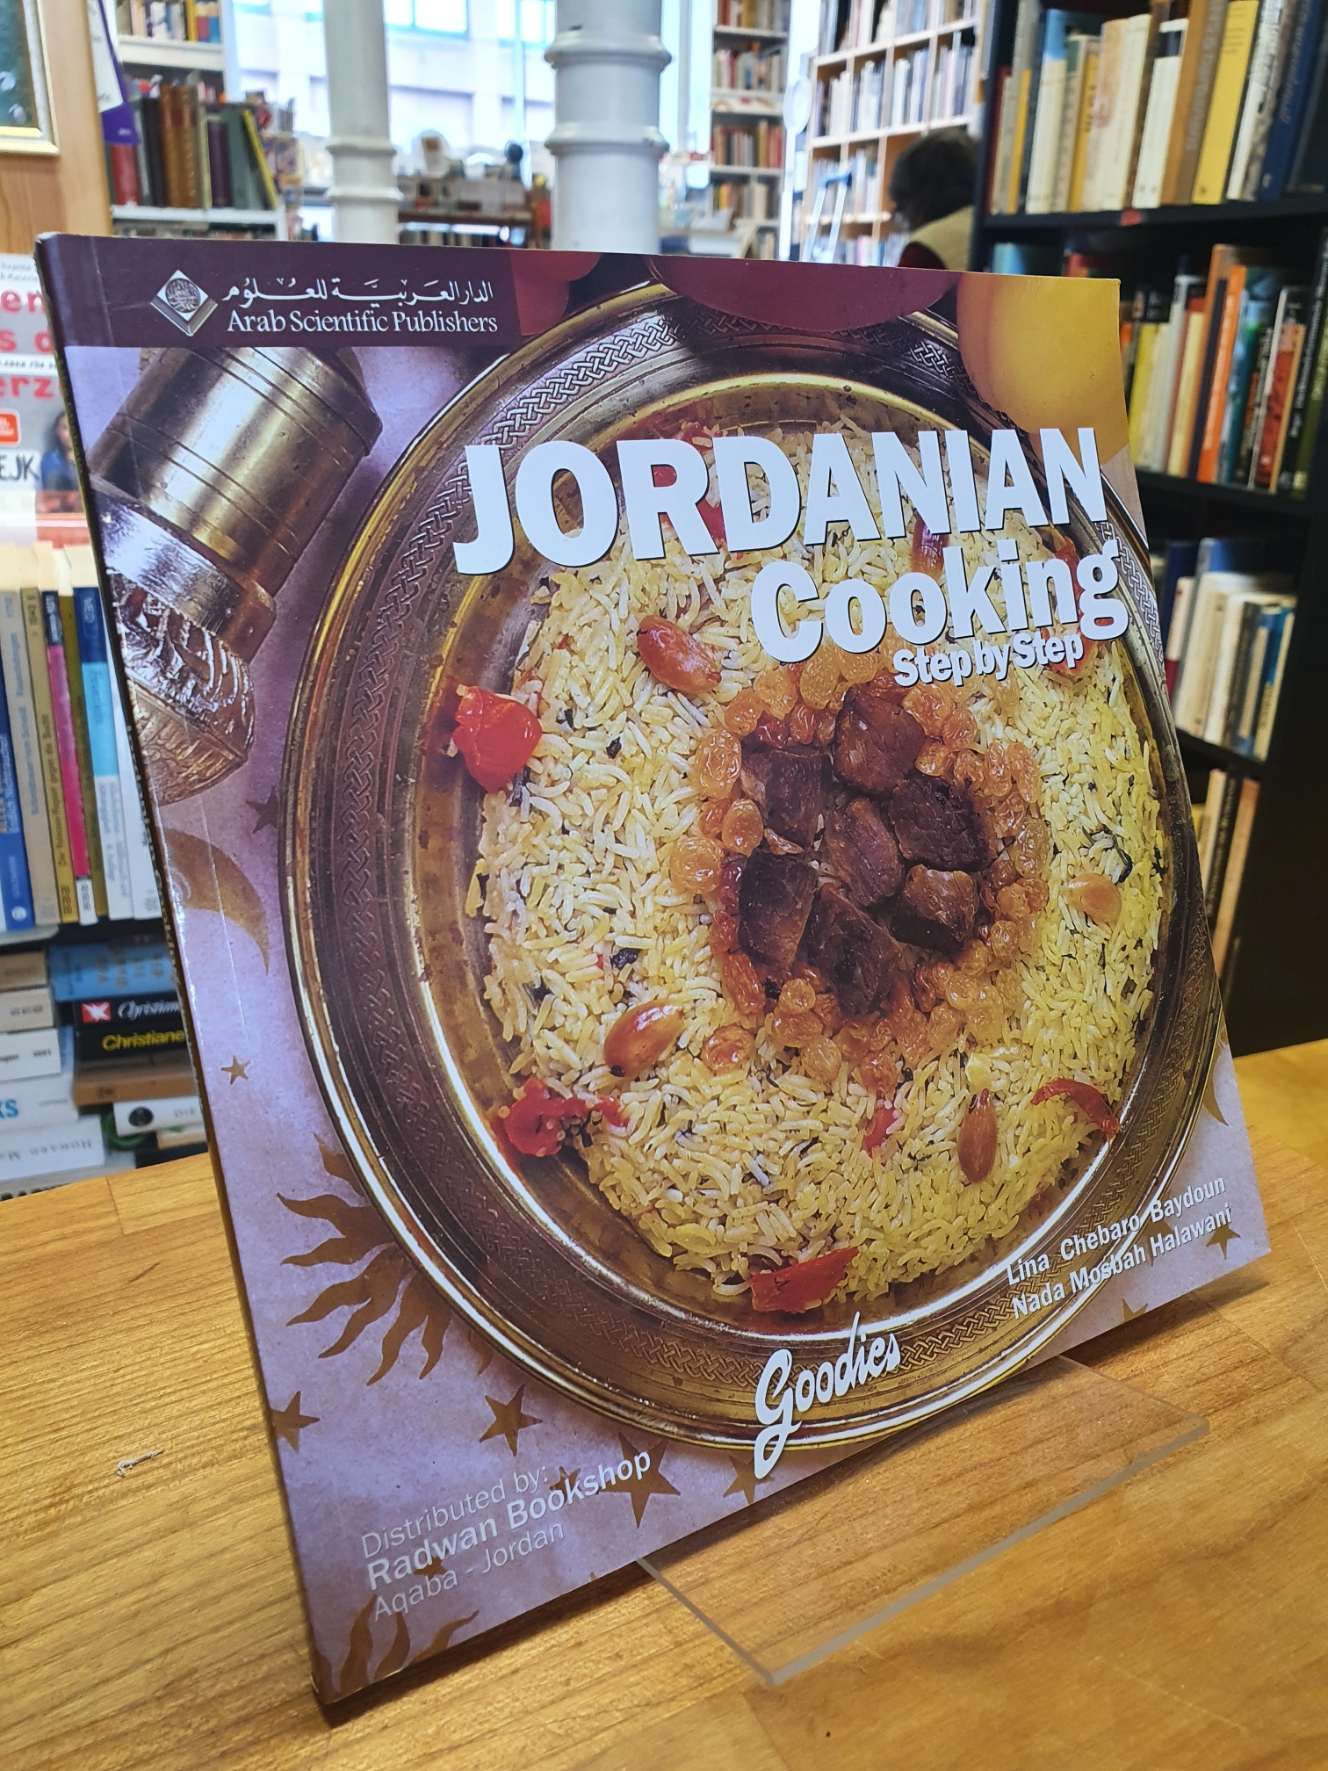 Jordanian Cooking – Step By Step